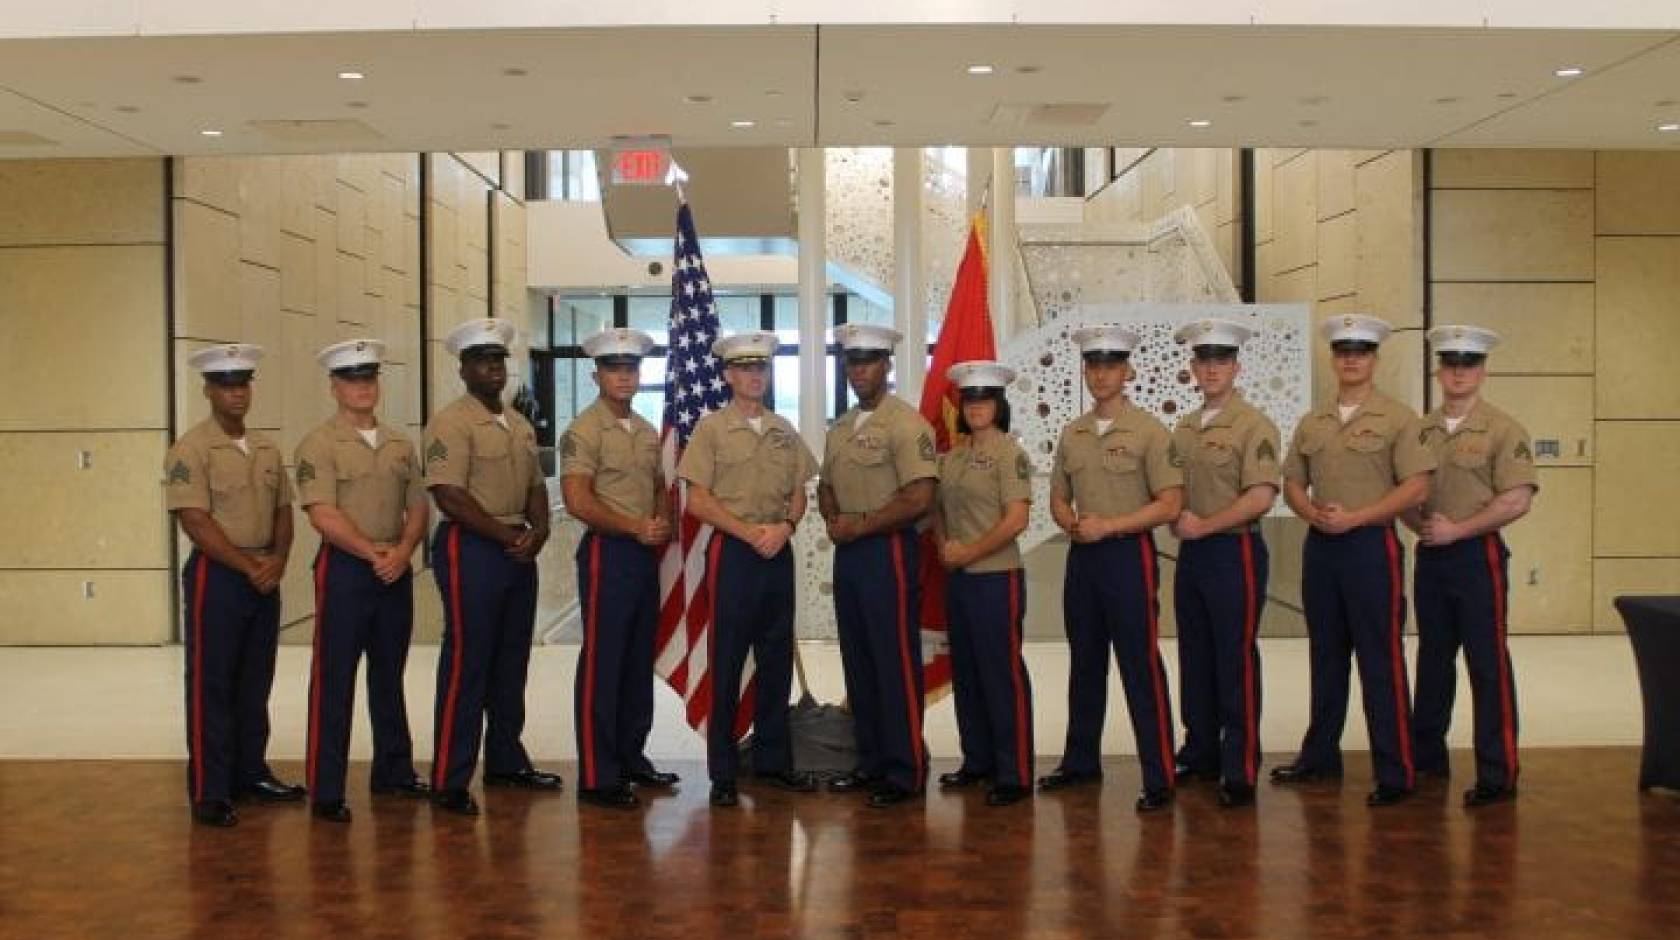 United States Marine Corps veteran and UCI sociology alumnus Andrew Truong ’23 (fourth from right), pictured with fellow service members, posing at ease in their uniforms in front of flags.